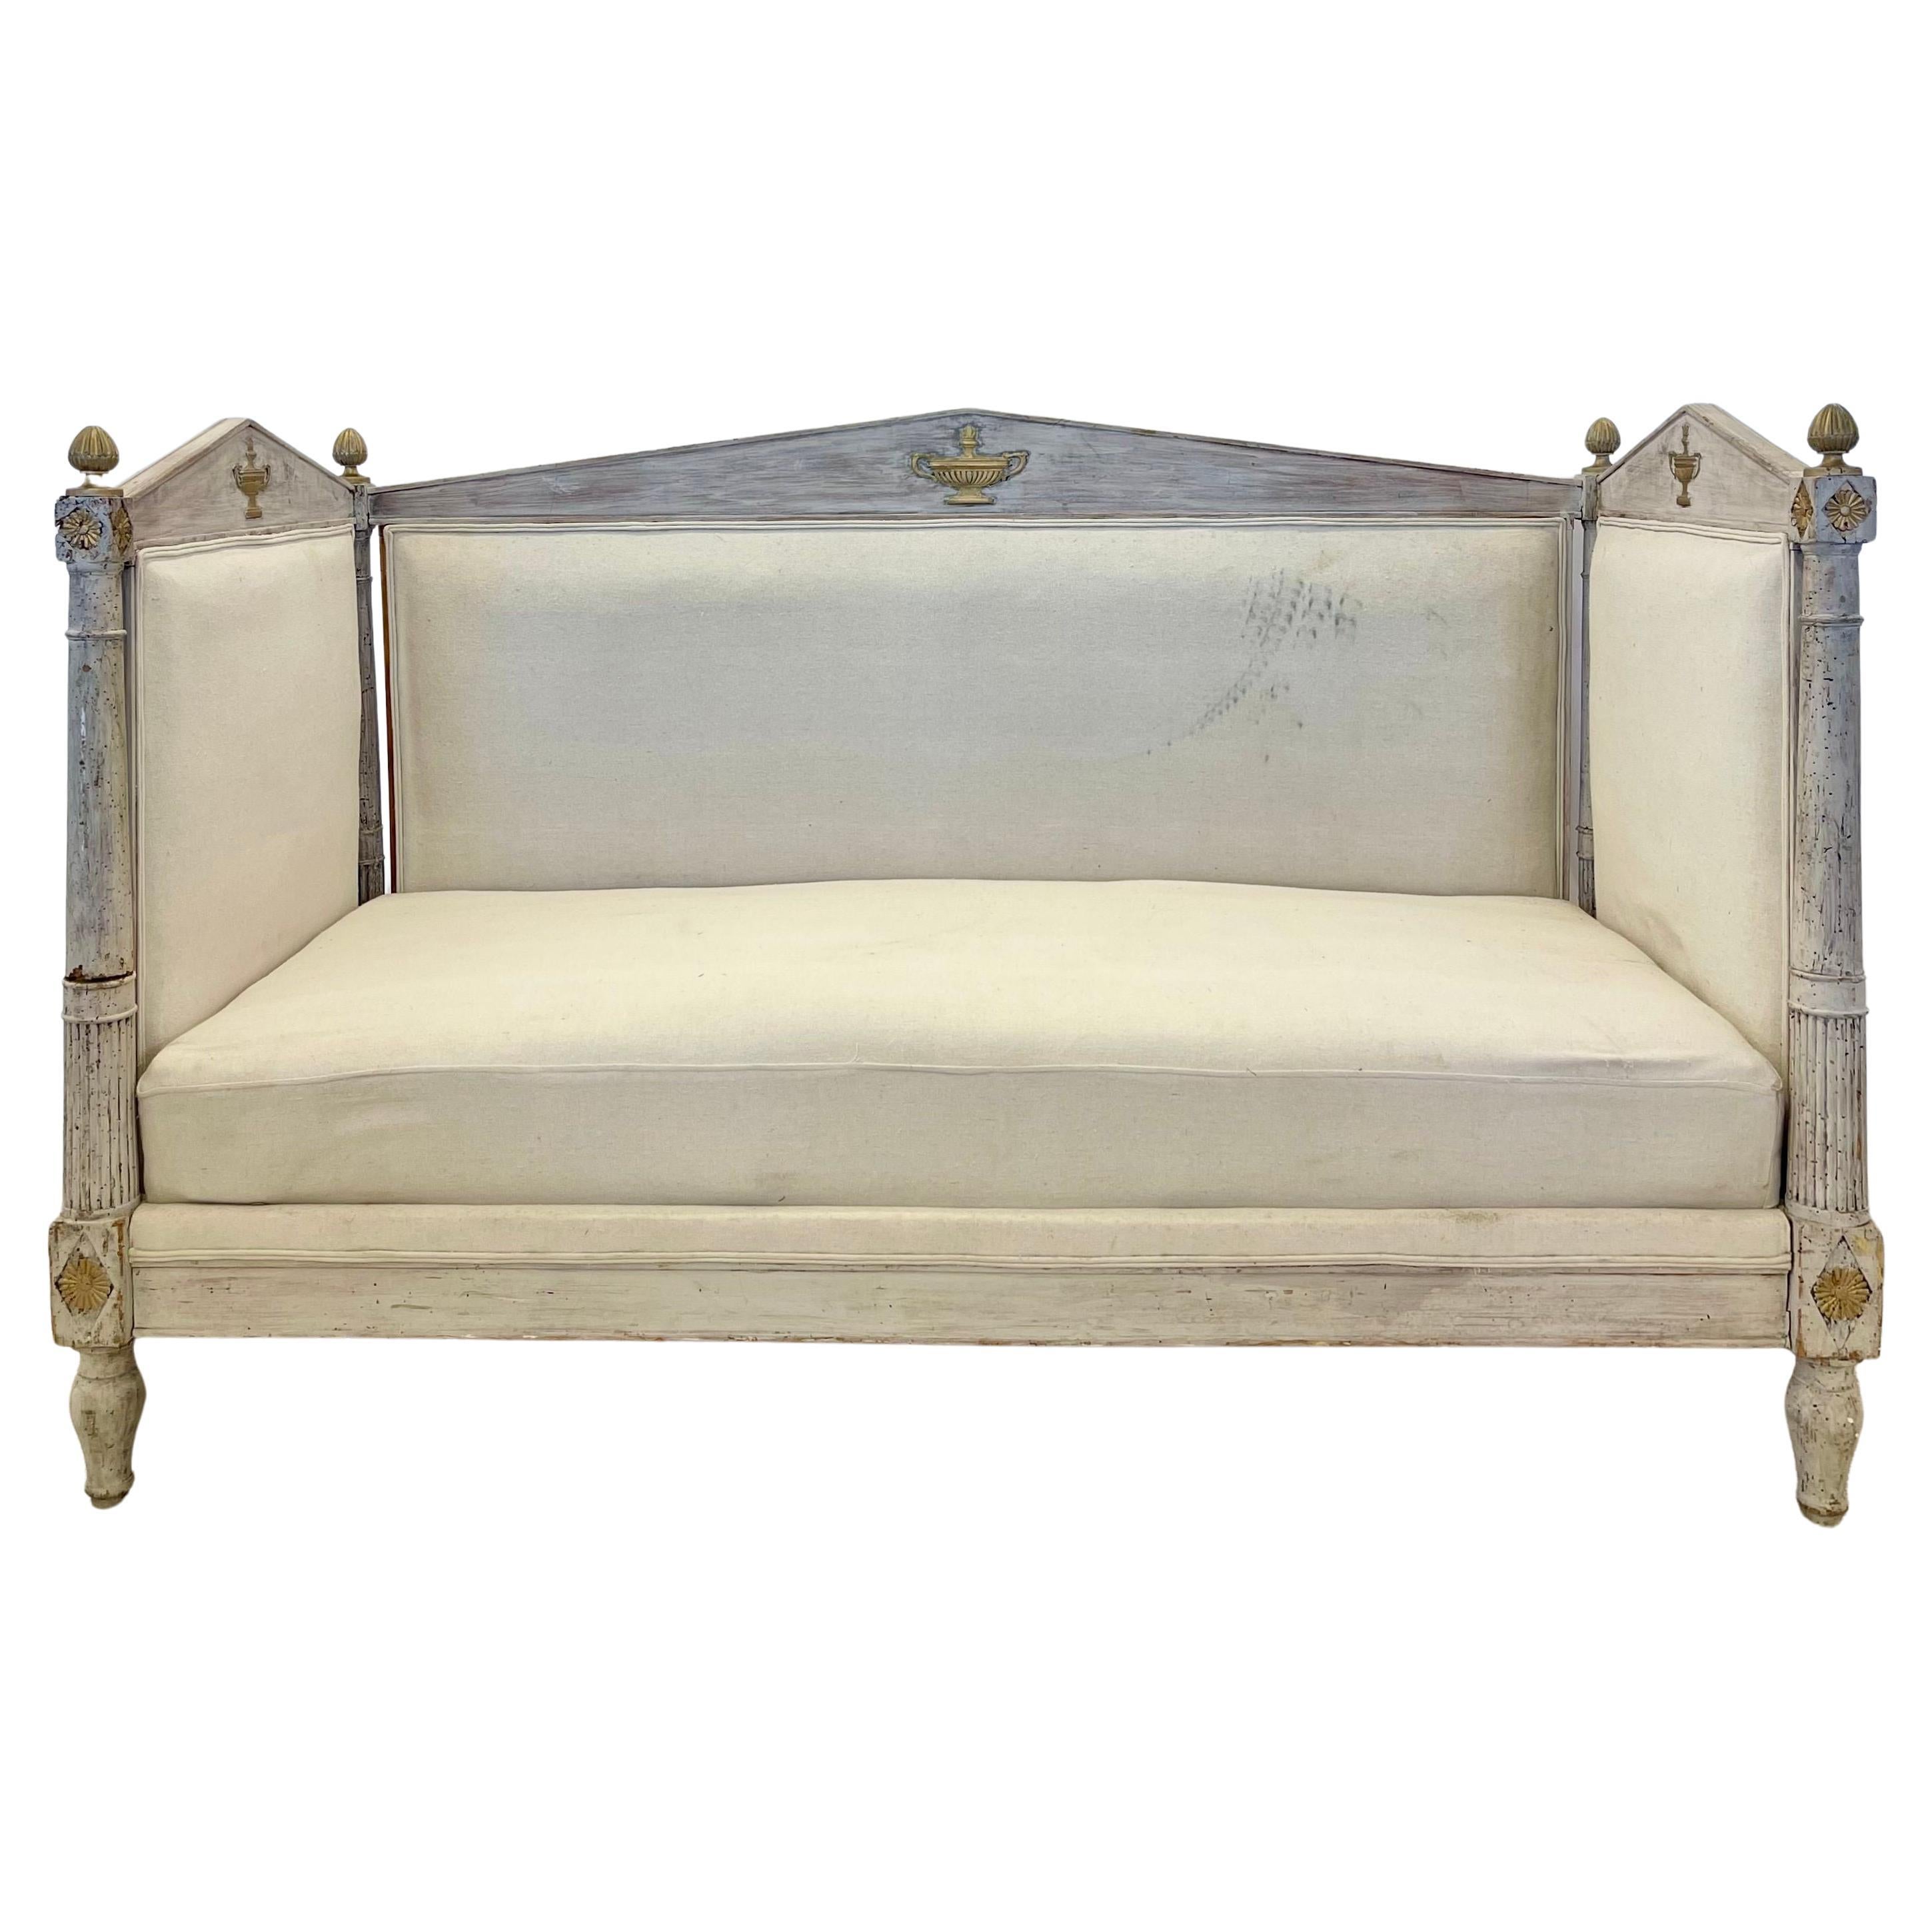 18th Century Gustavian Sofa, Daybed, Swedish Paint Decorated, Sweden